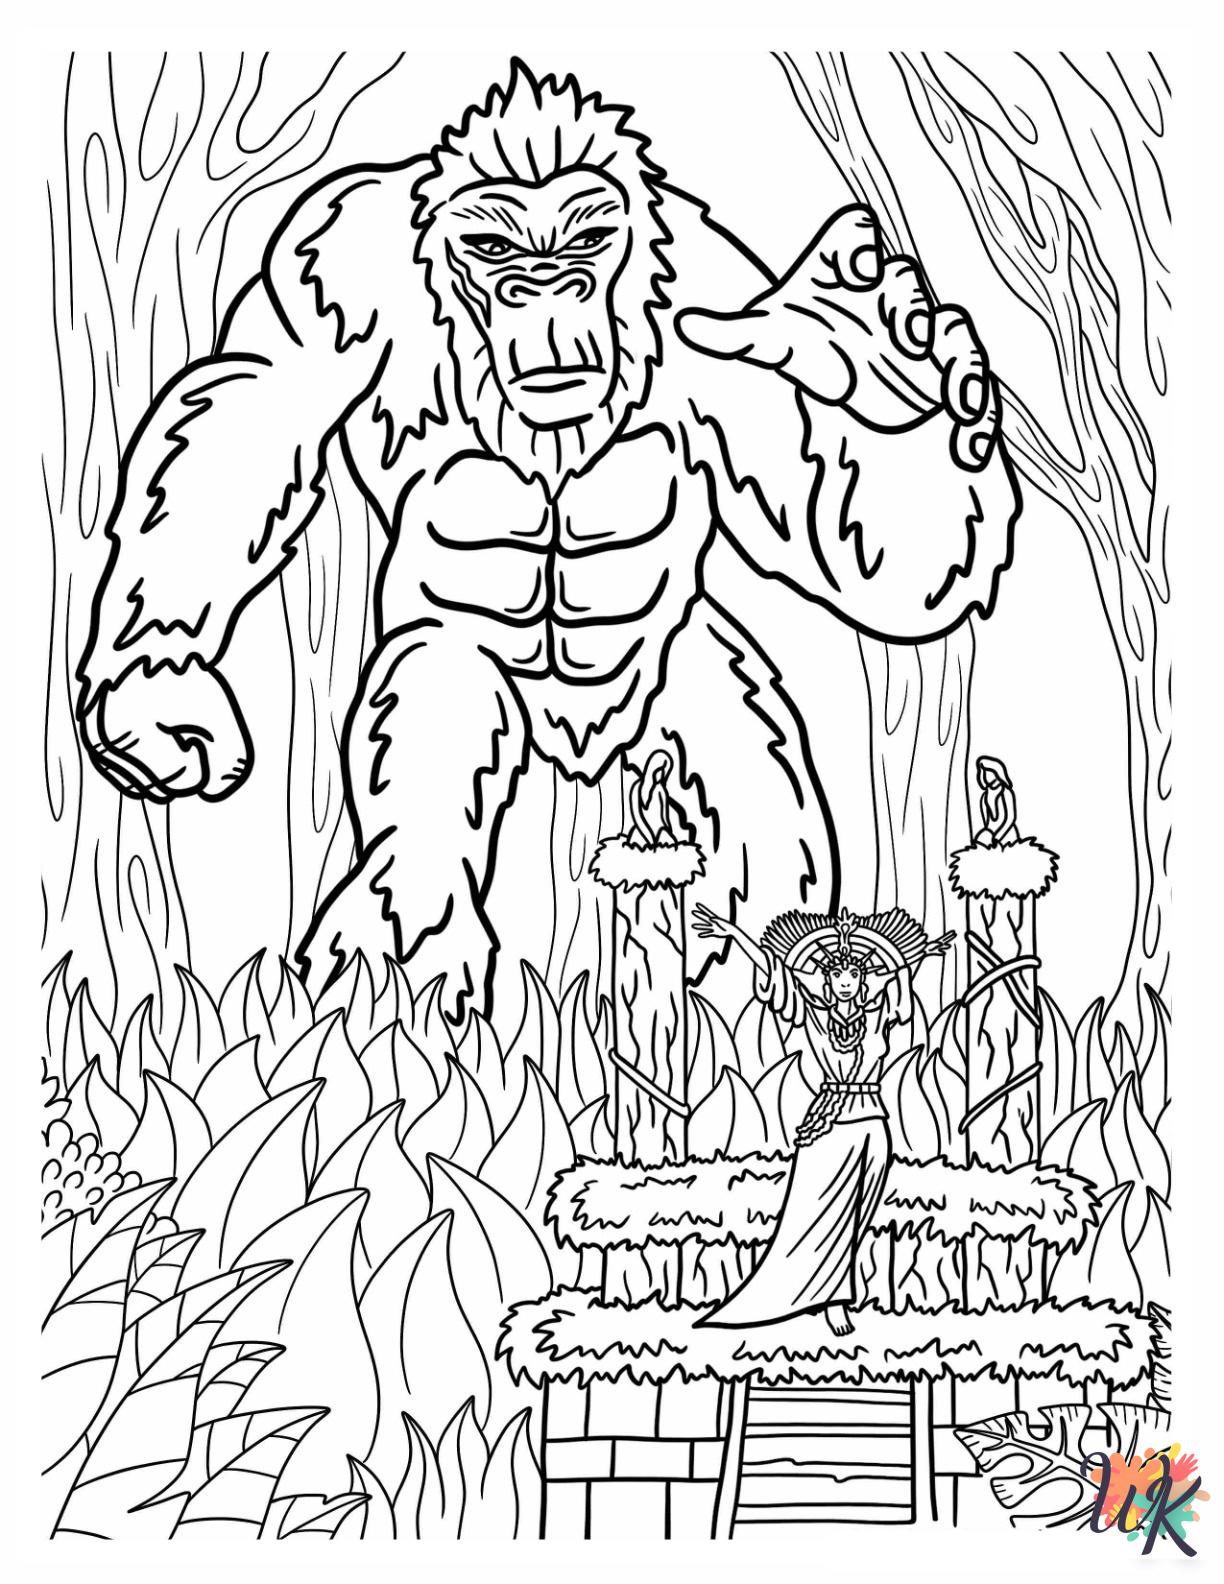 King Kong coloring pages for adults